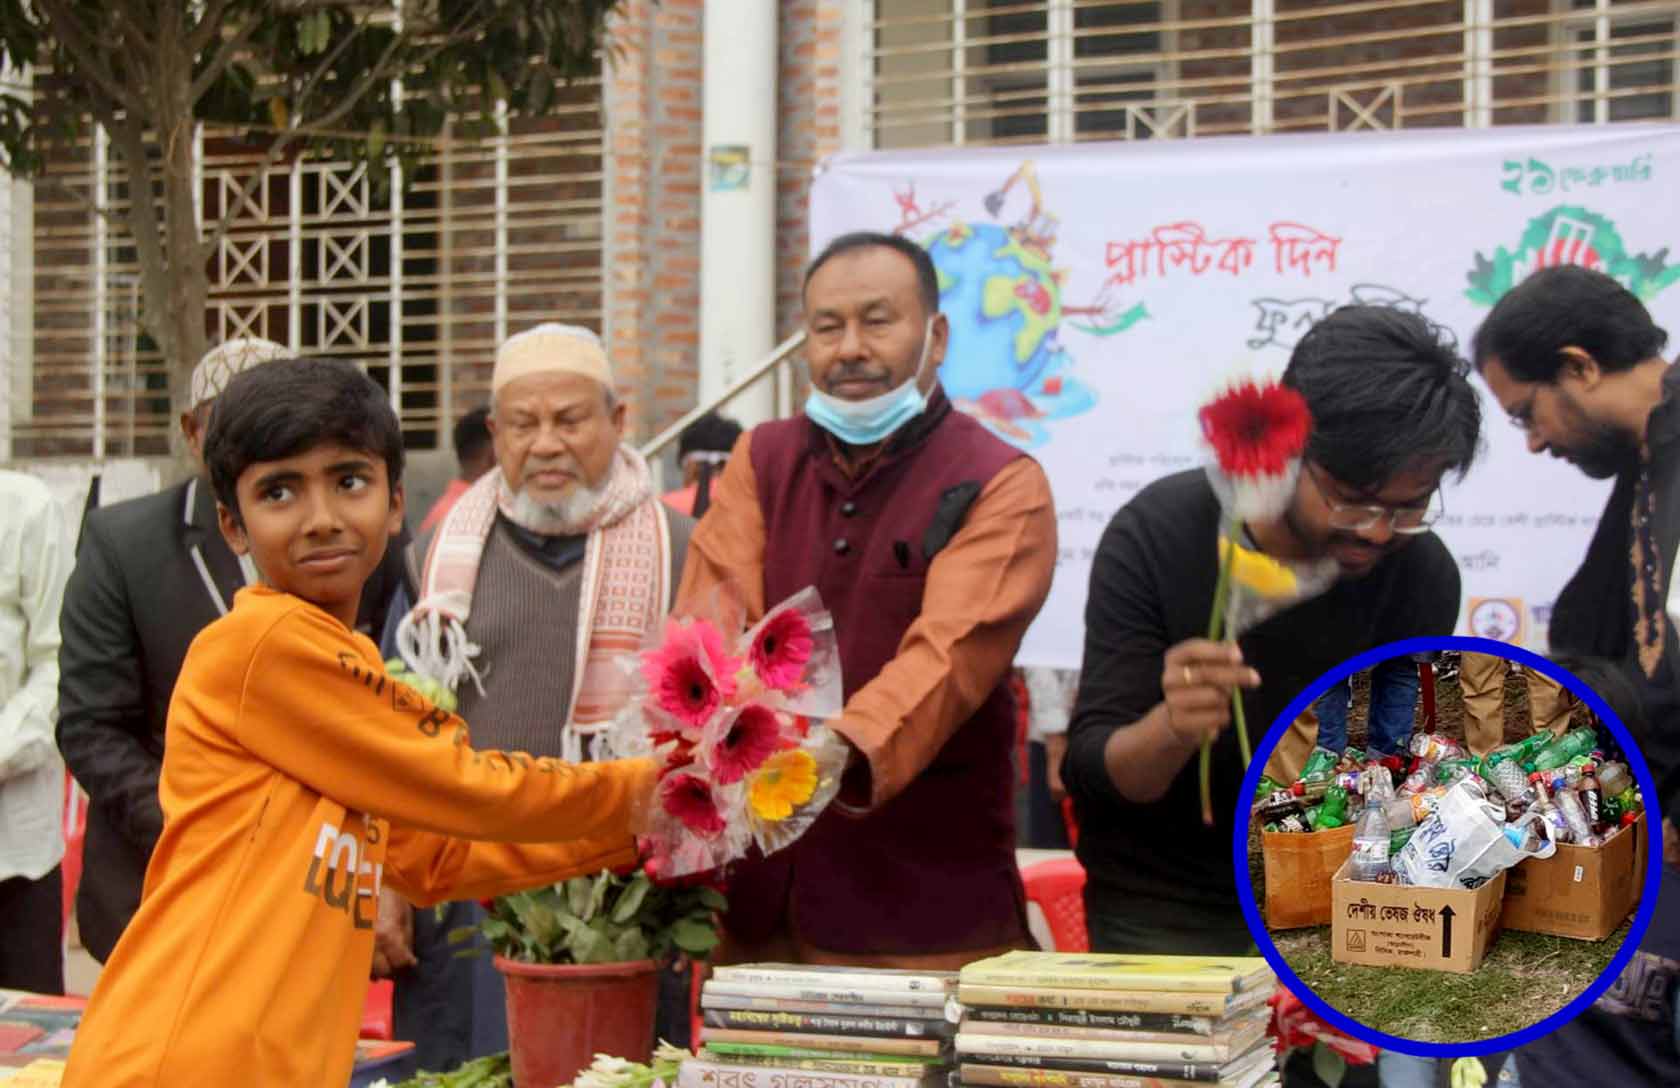 Language Martyrs Commemorated with Plastic-Free Flower Exchange by Bangladeshi Youth Groups